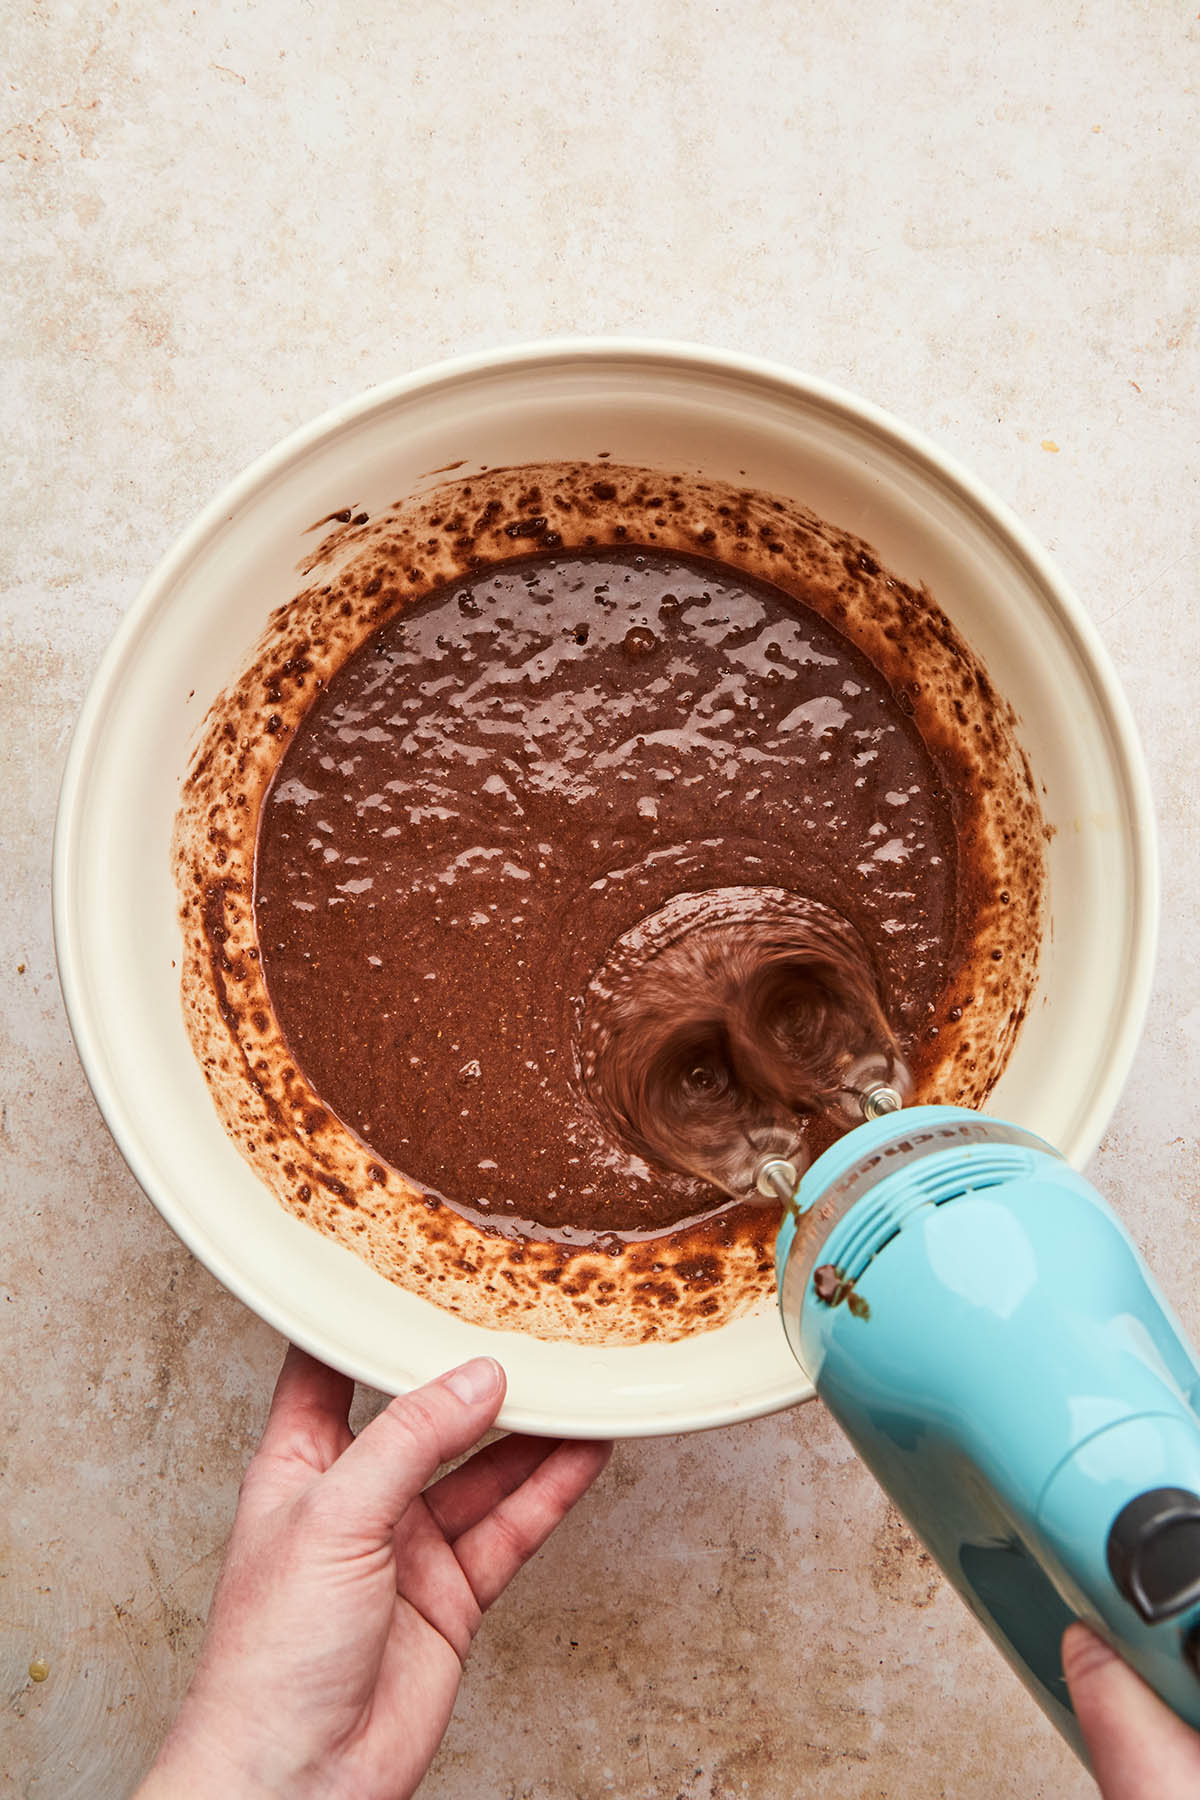 A hand using a handheld electric mixer to mix cake batter in a large mixing bowl.